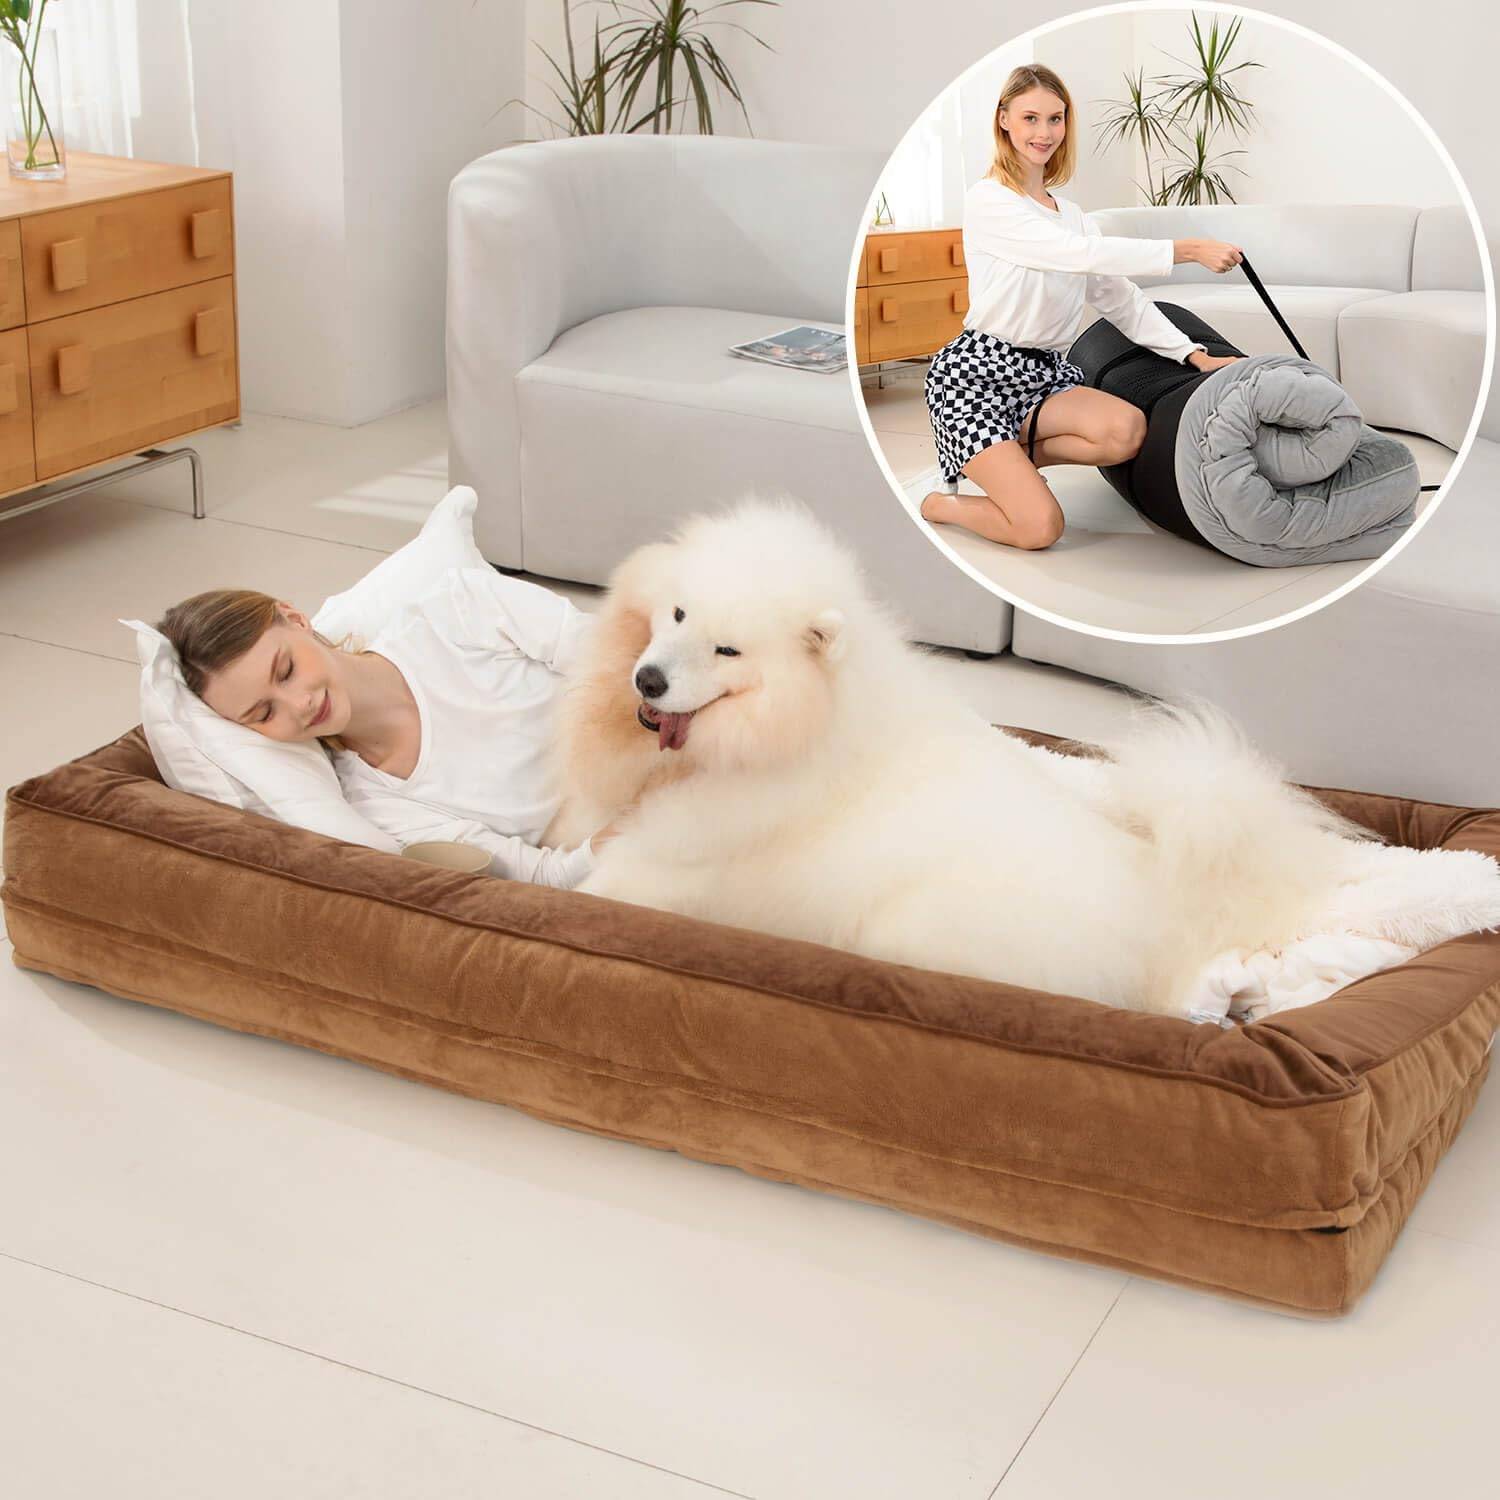 human dog bed with woman and big white fluffy dog